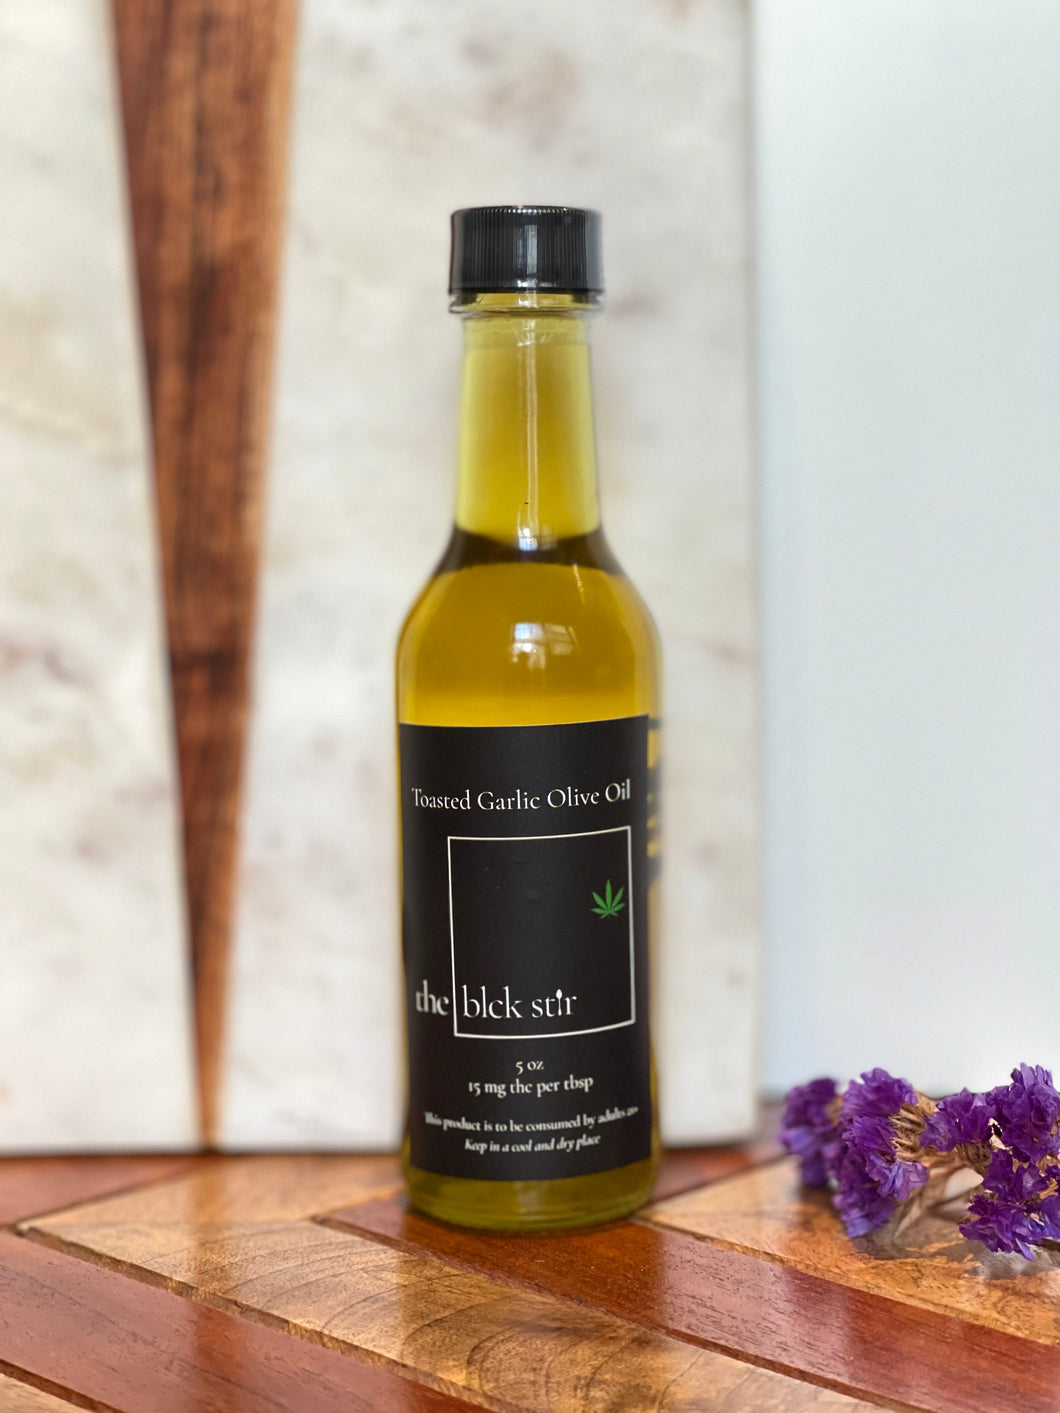 Toasted Garlic Olive Oil